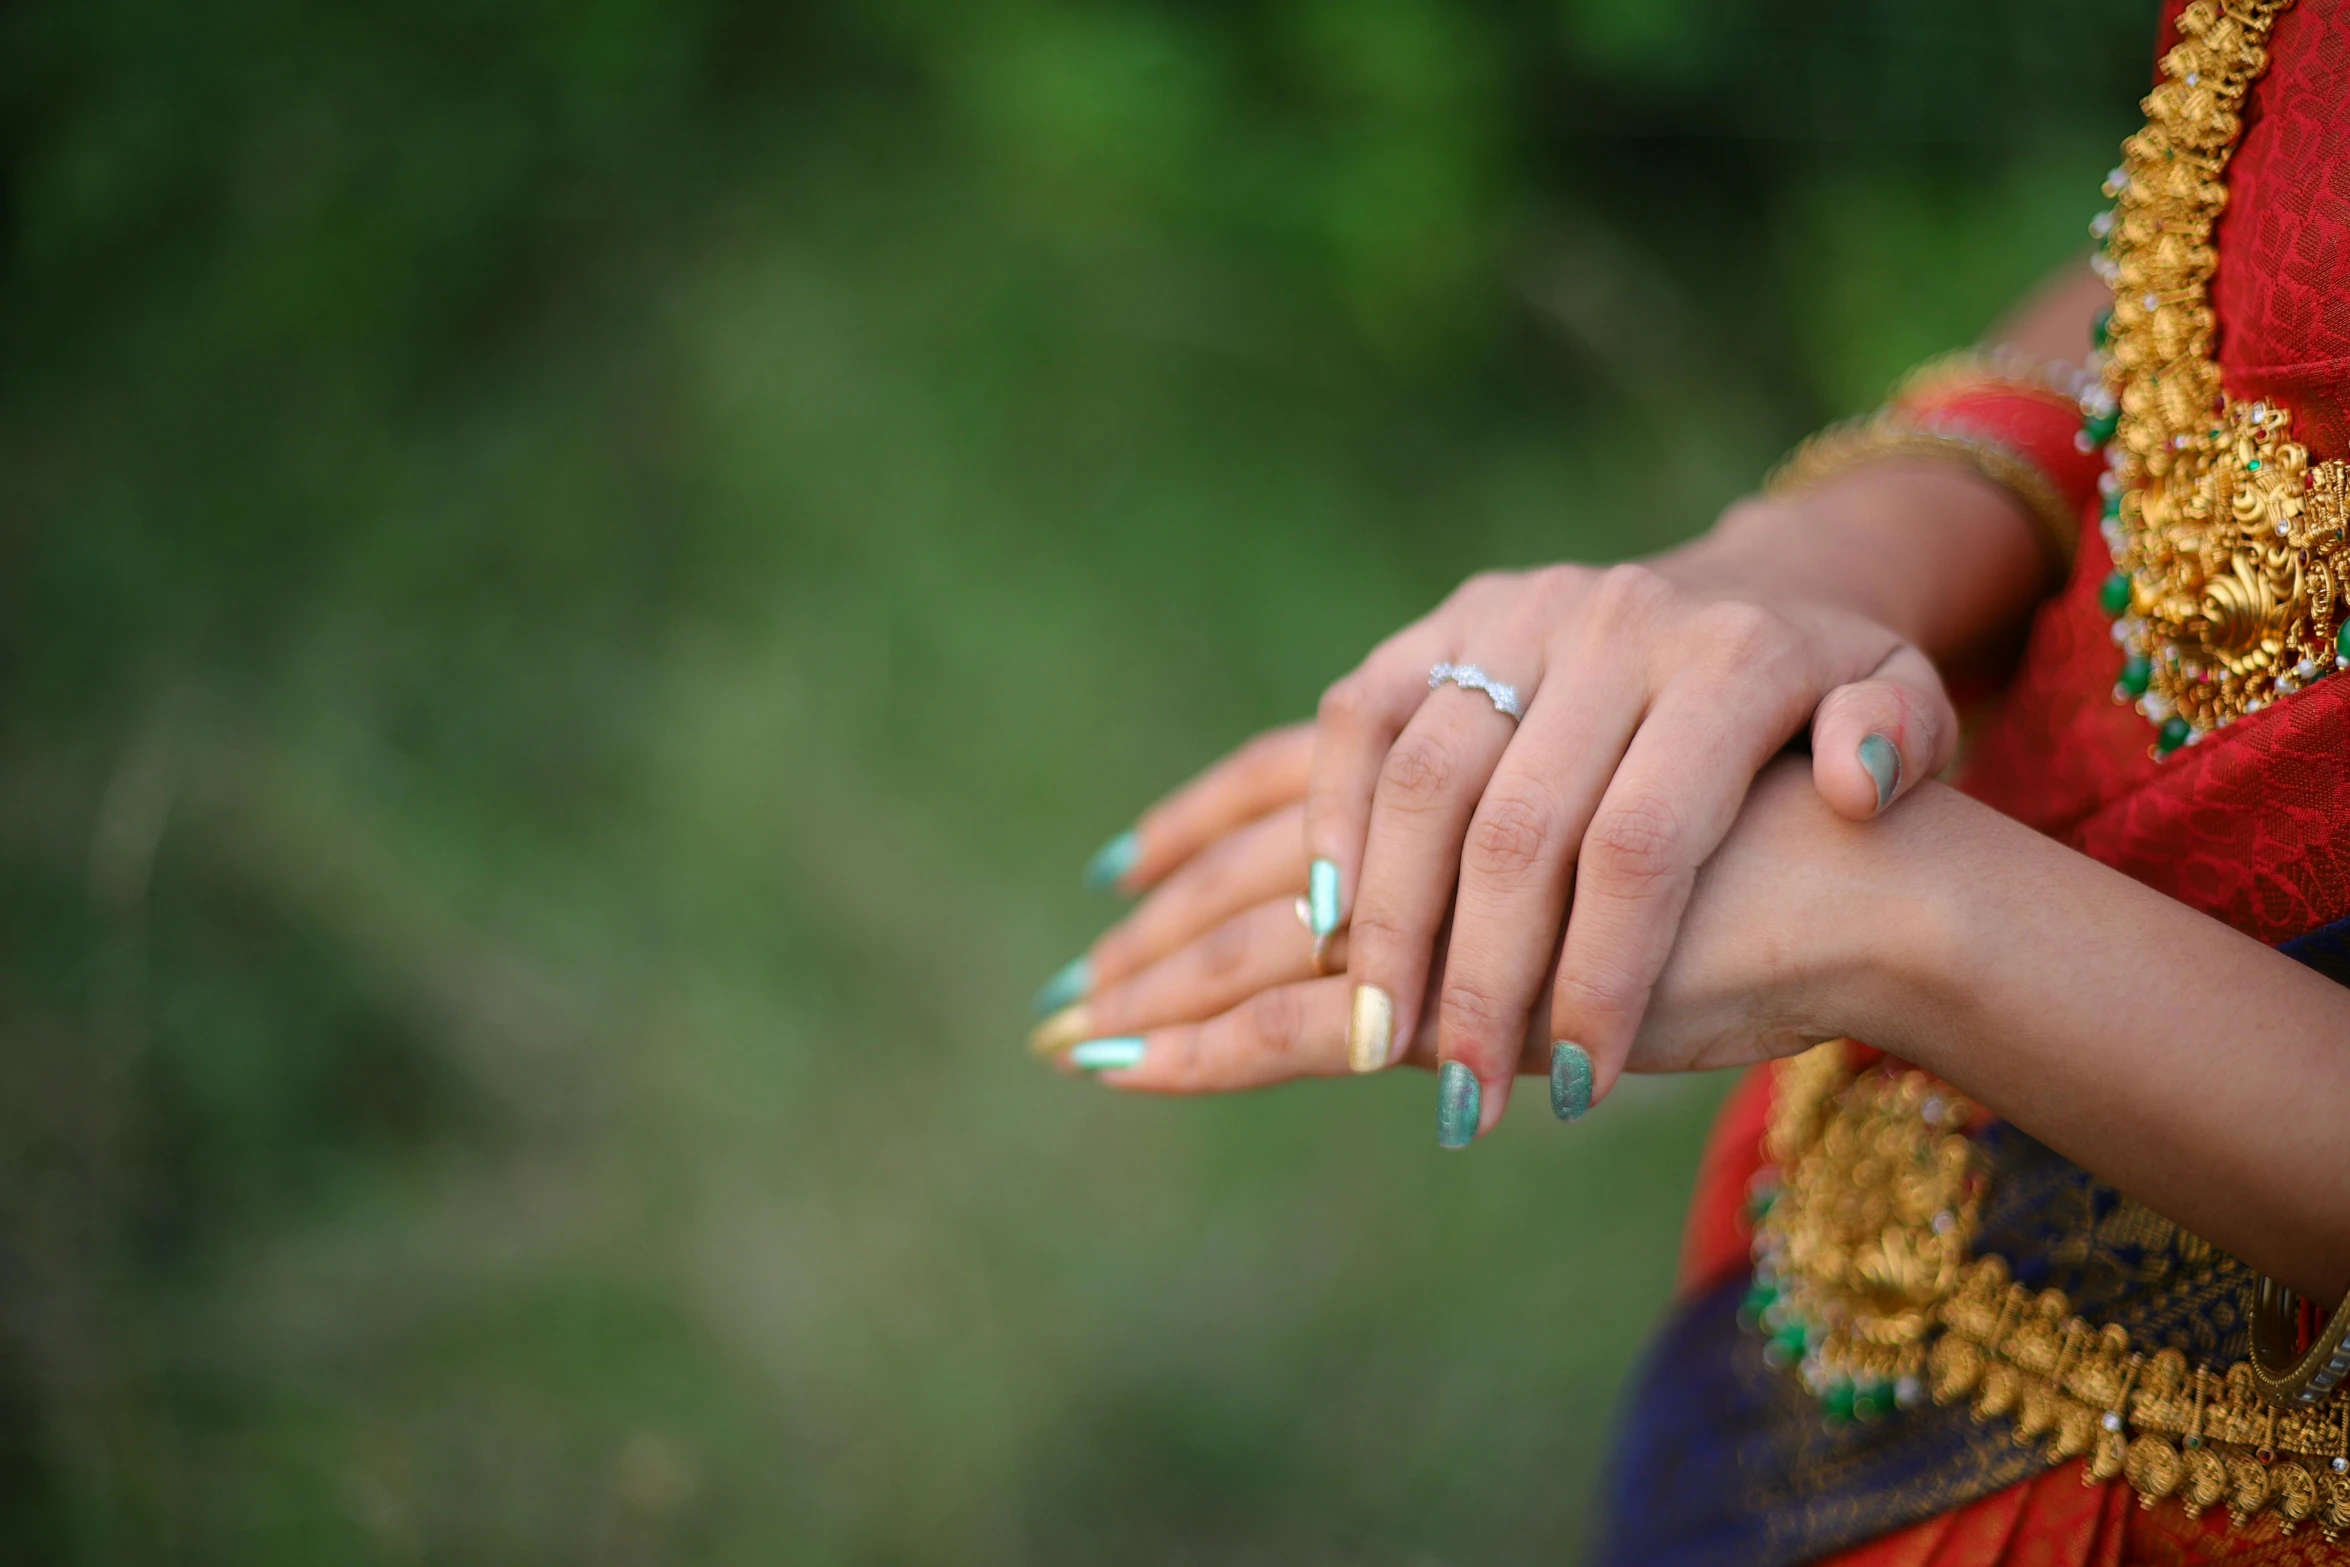 a woman holding onto another person's hand with manicures